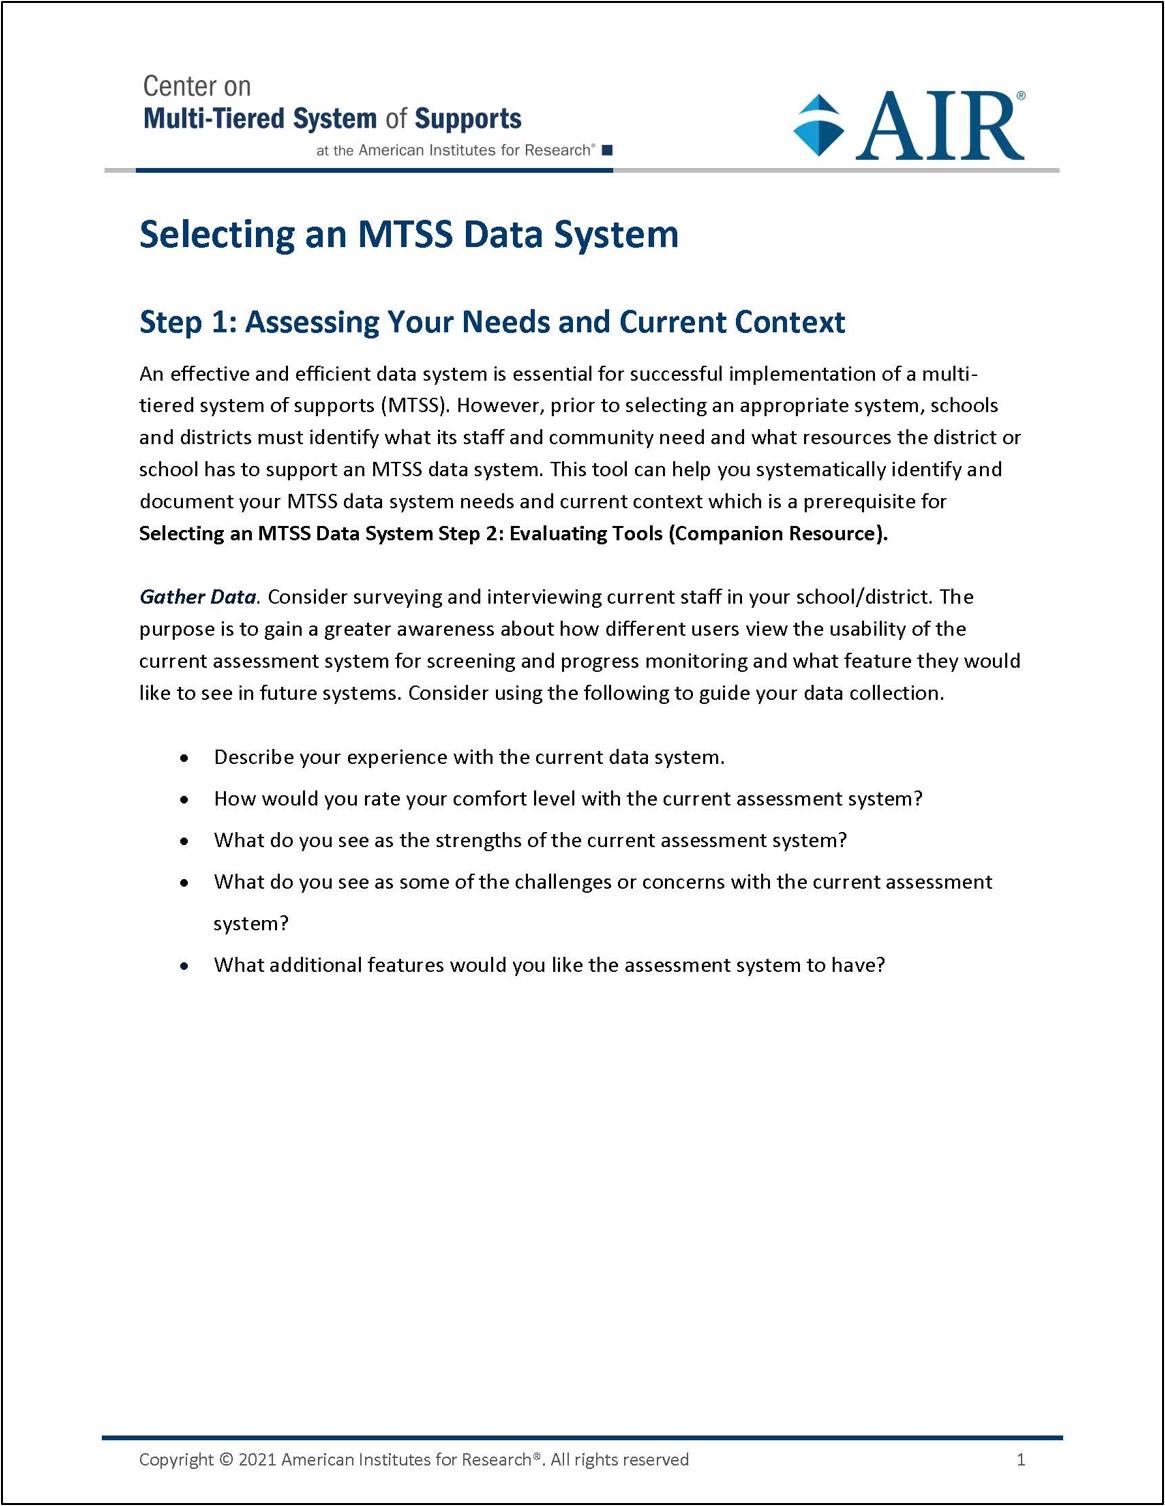 page 1 of selecting an MTSS data system